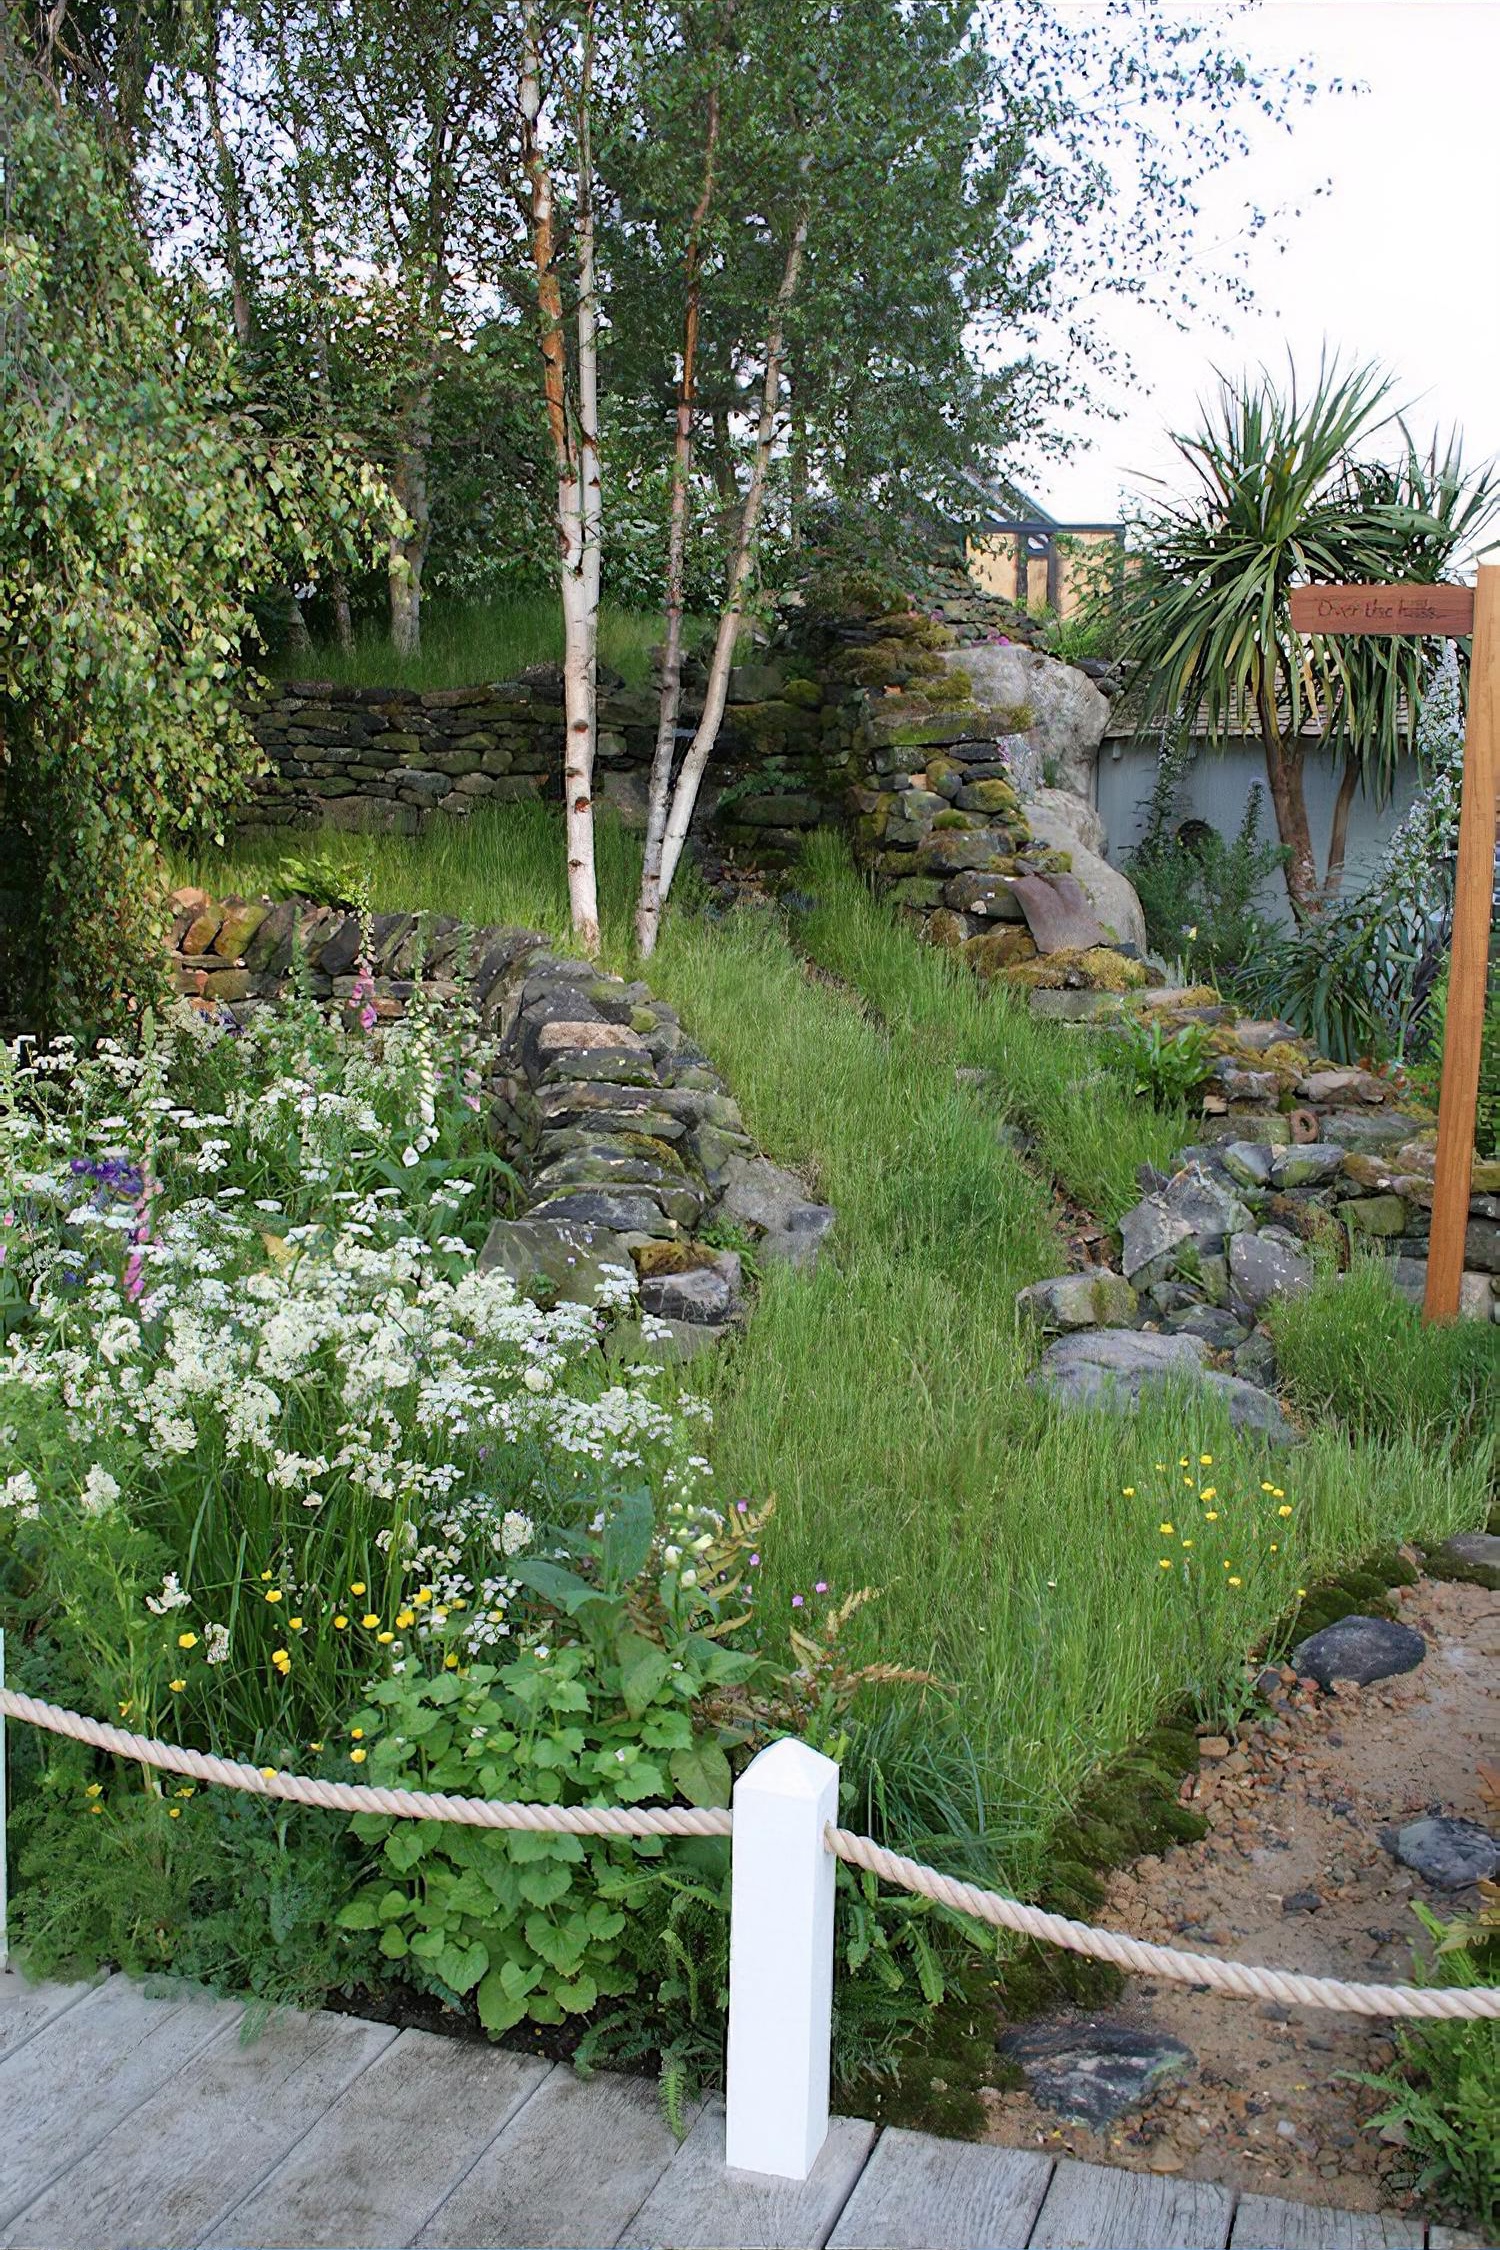 From the Moors to the Sea Garden